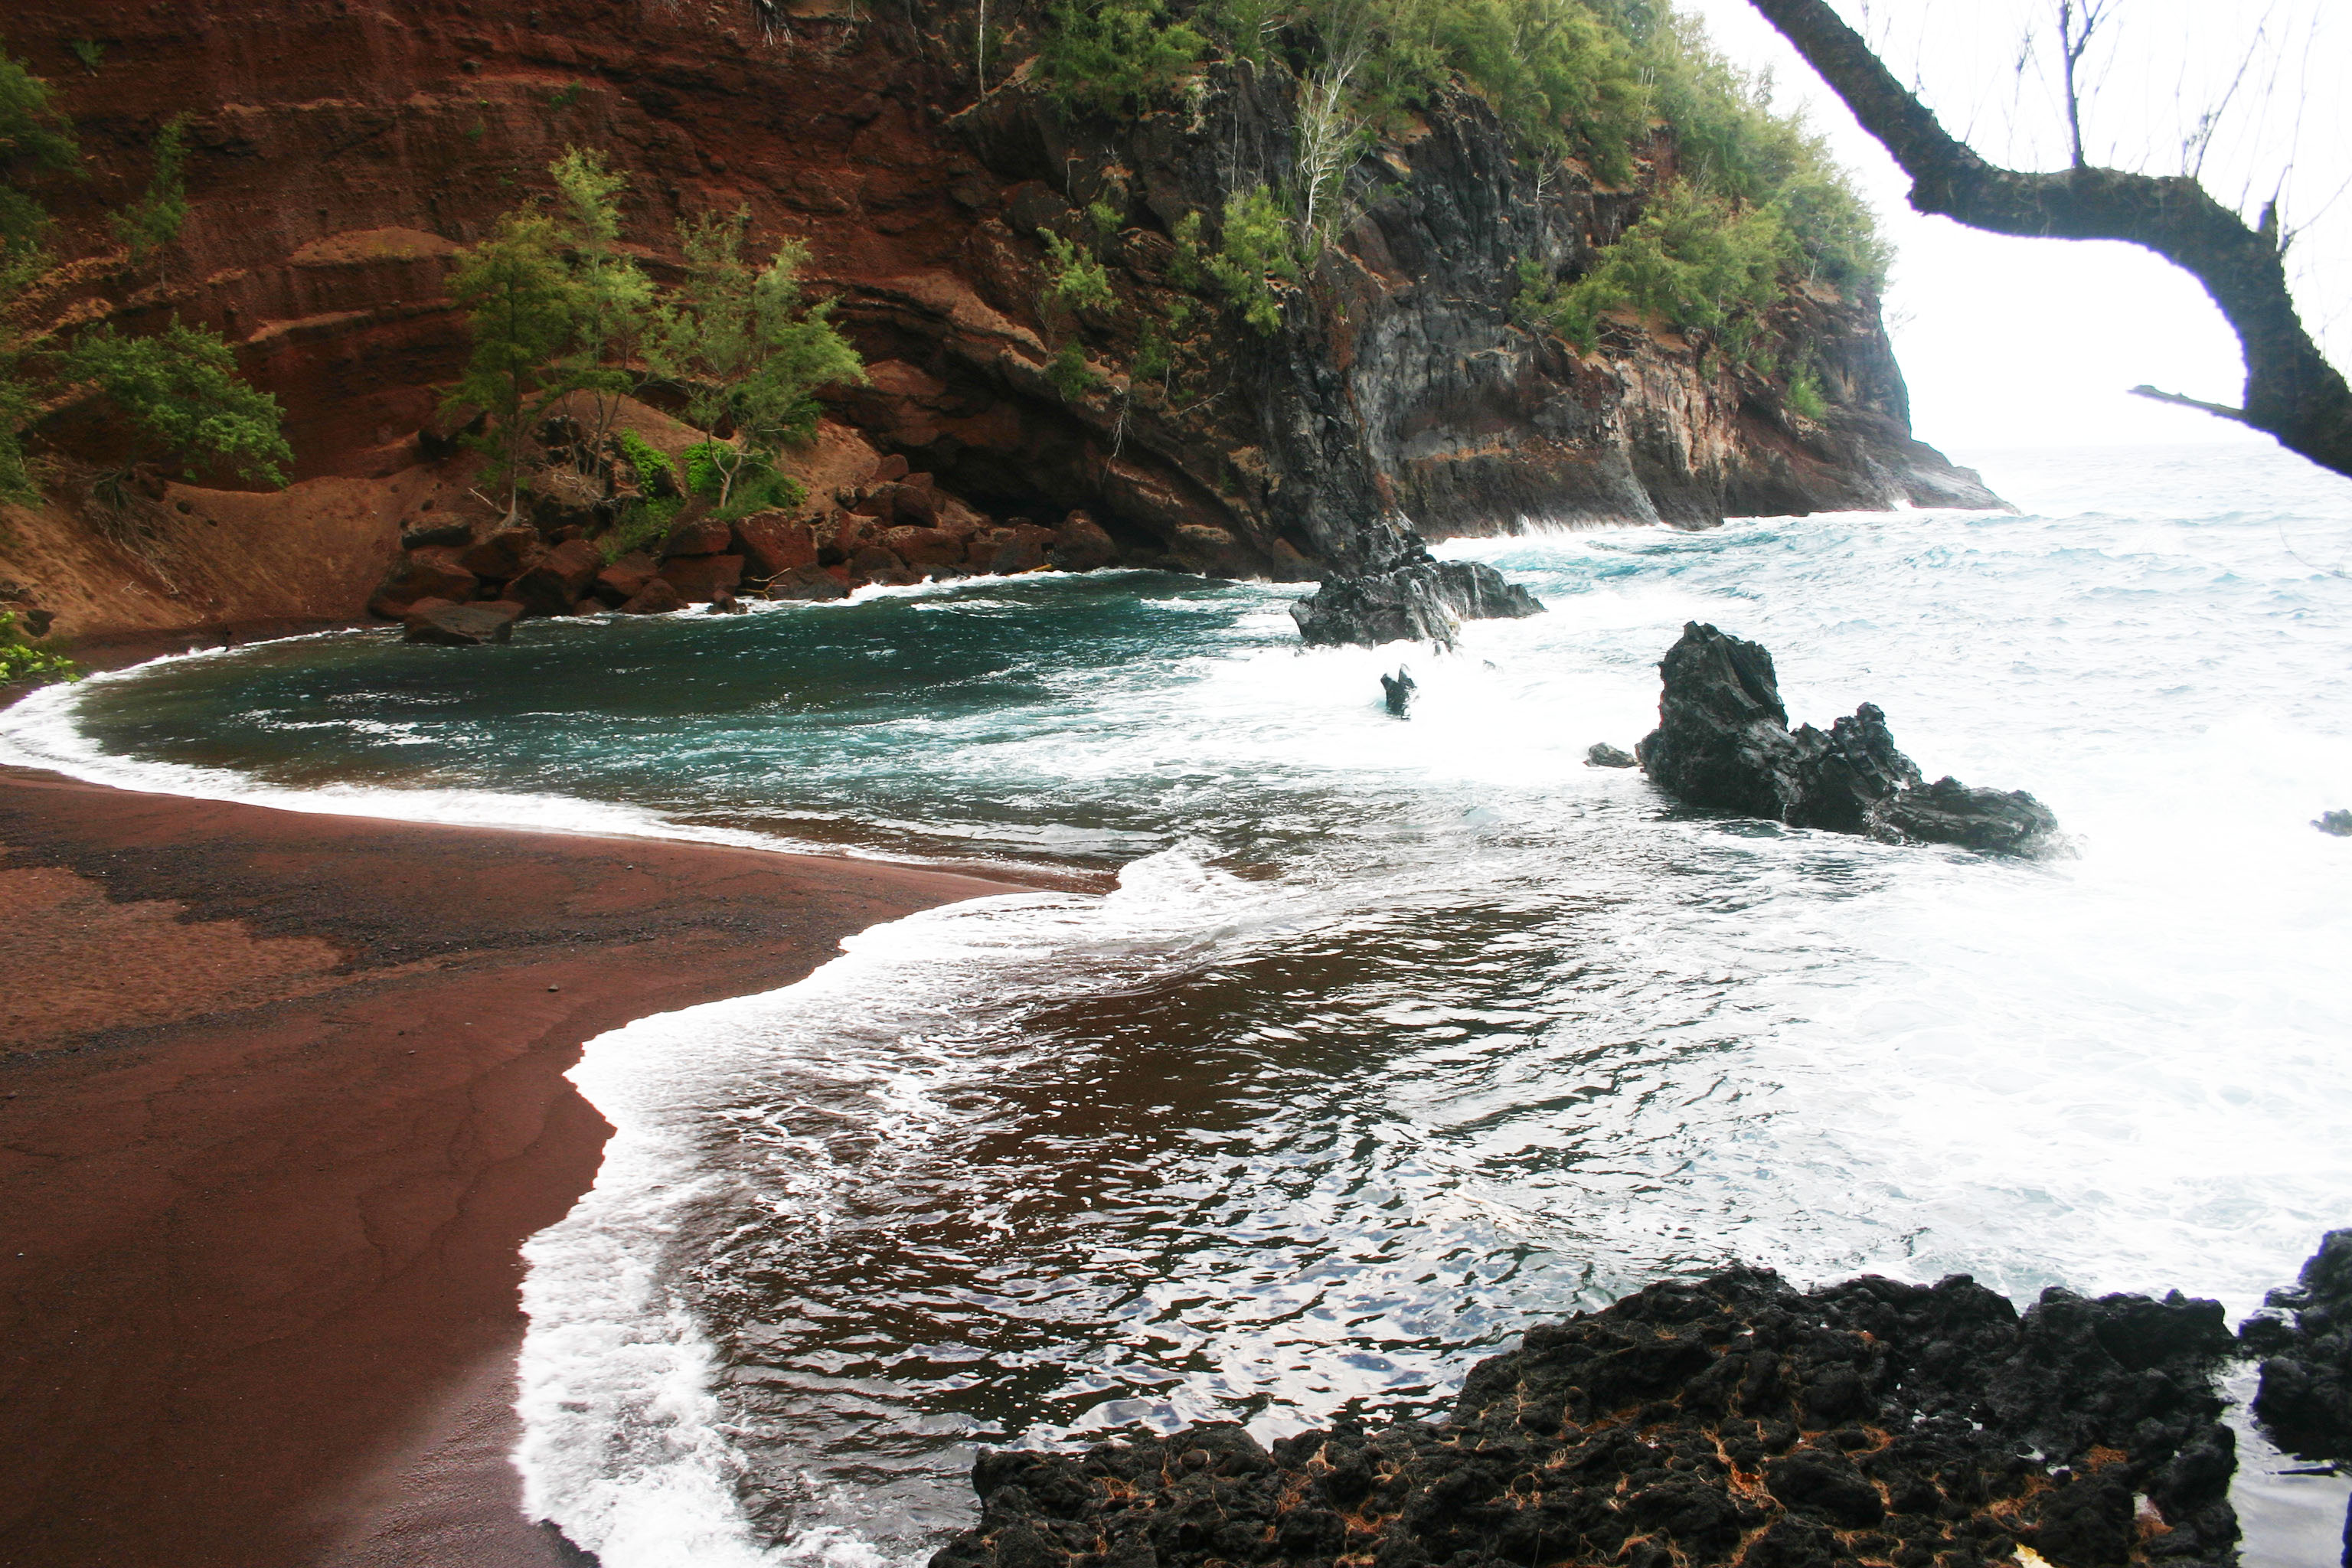 Kaihalulu Red Sand Beach in the little town of Hana on 